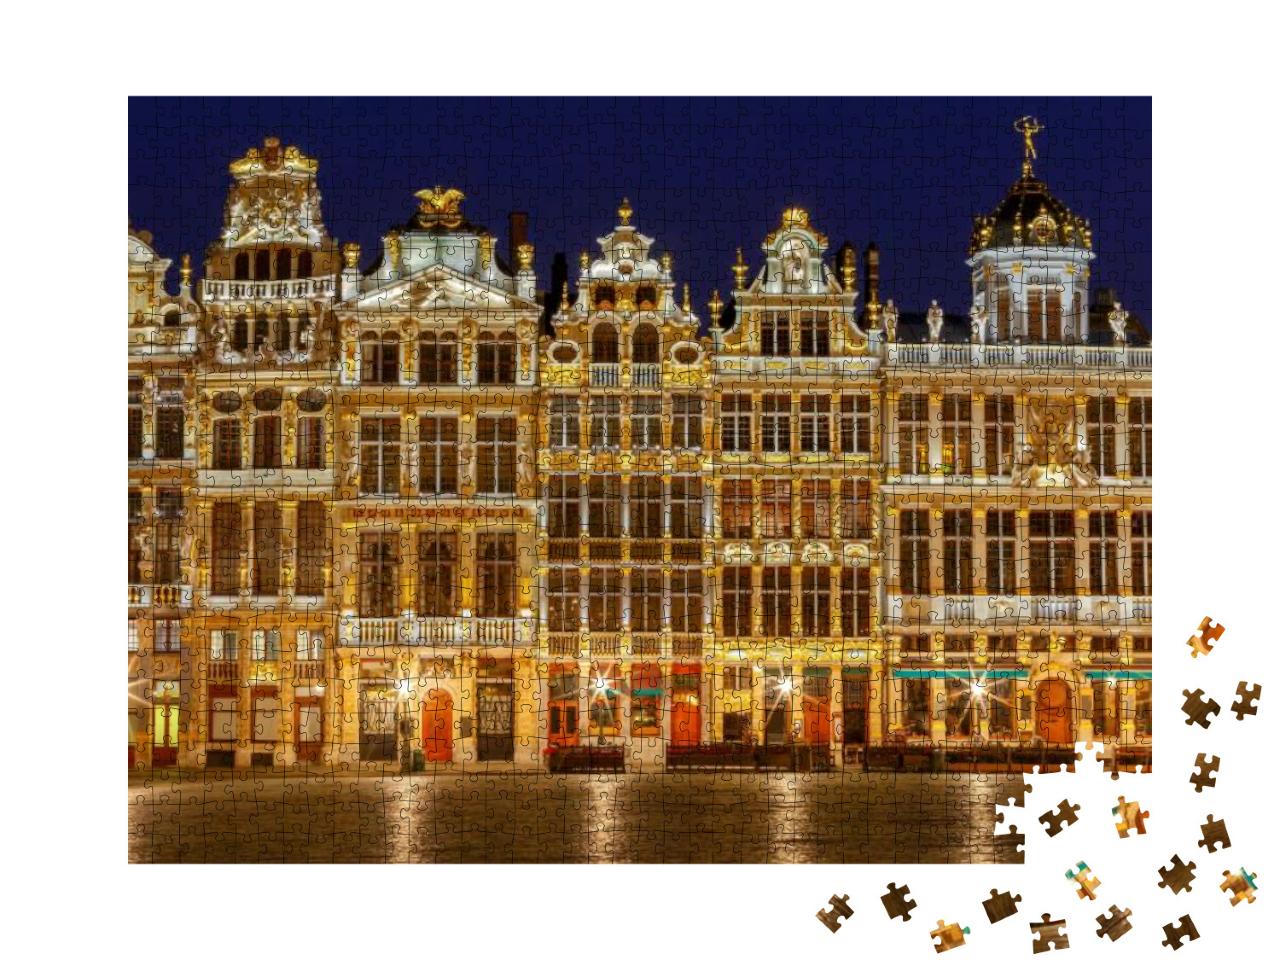 Puzzle 1000 Teile „Grand-Place in Brüssel bei Nacht“